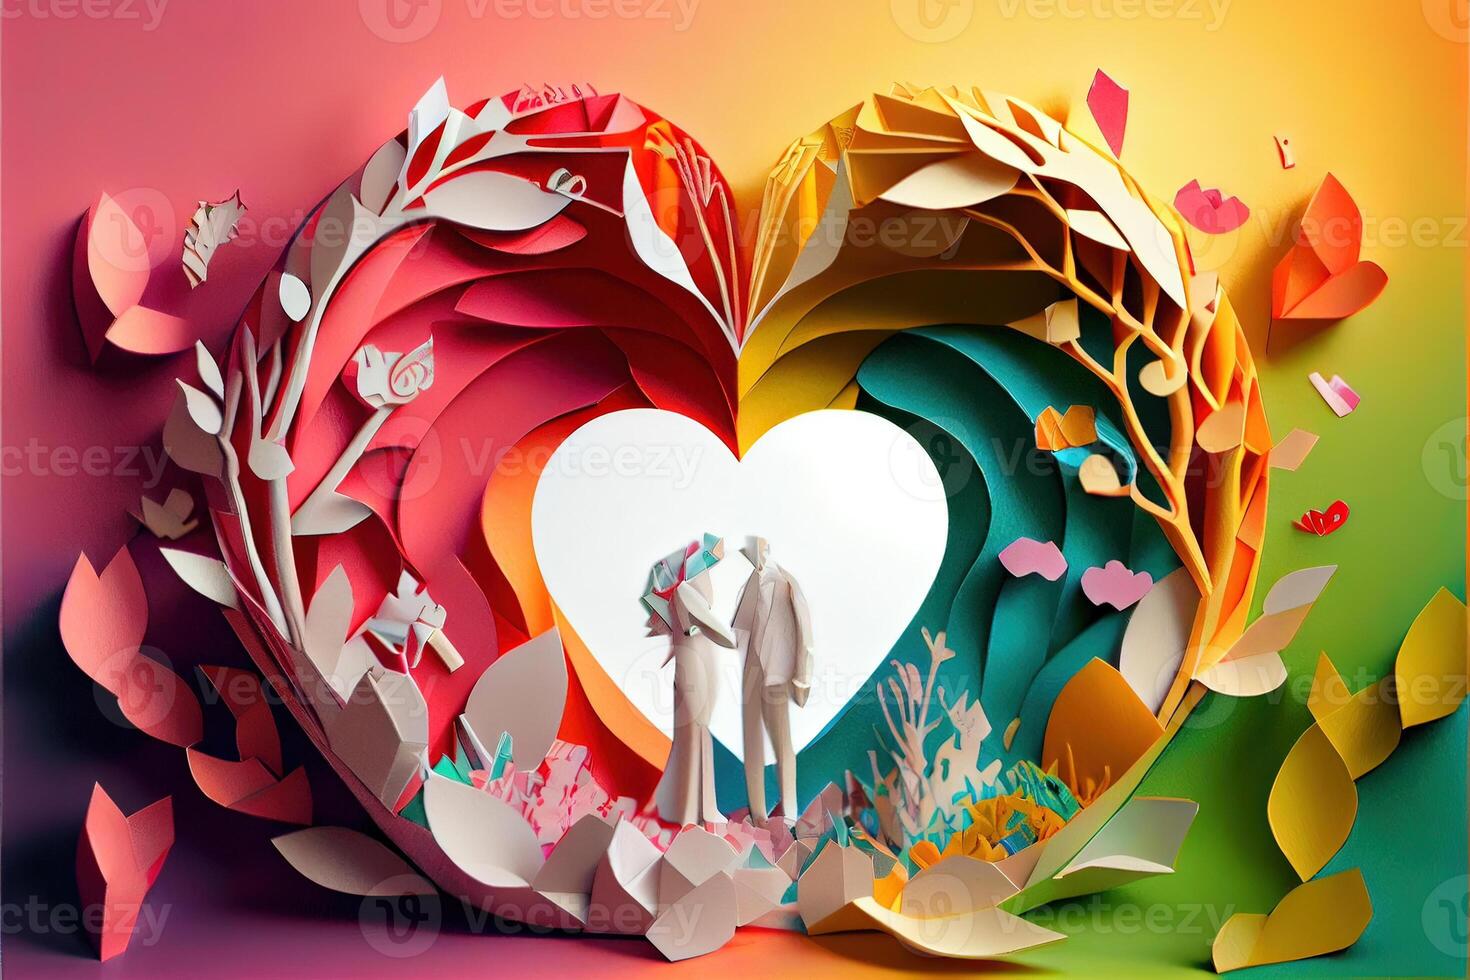 illustration of origami Valentine day background, happy couple, colorful. Paper cut craft, 3d paper style. Neural network generated art. Digitally generated image photo